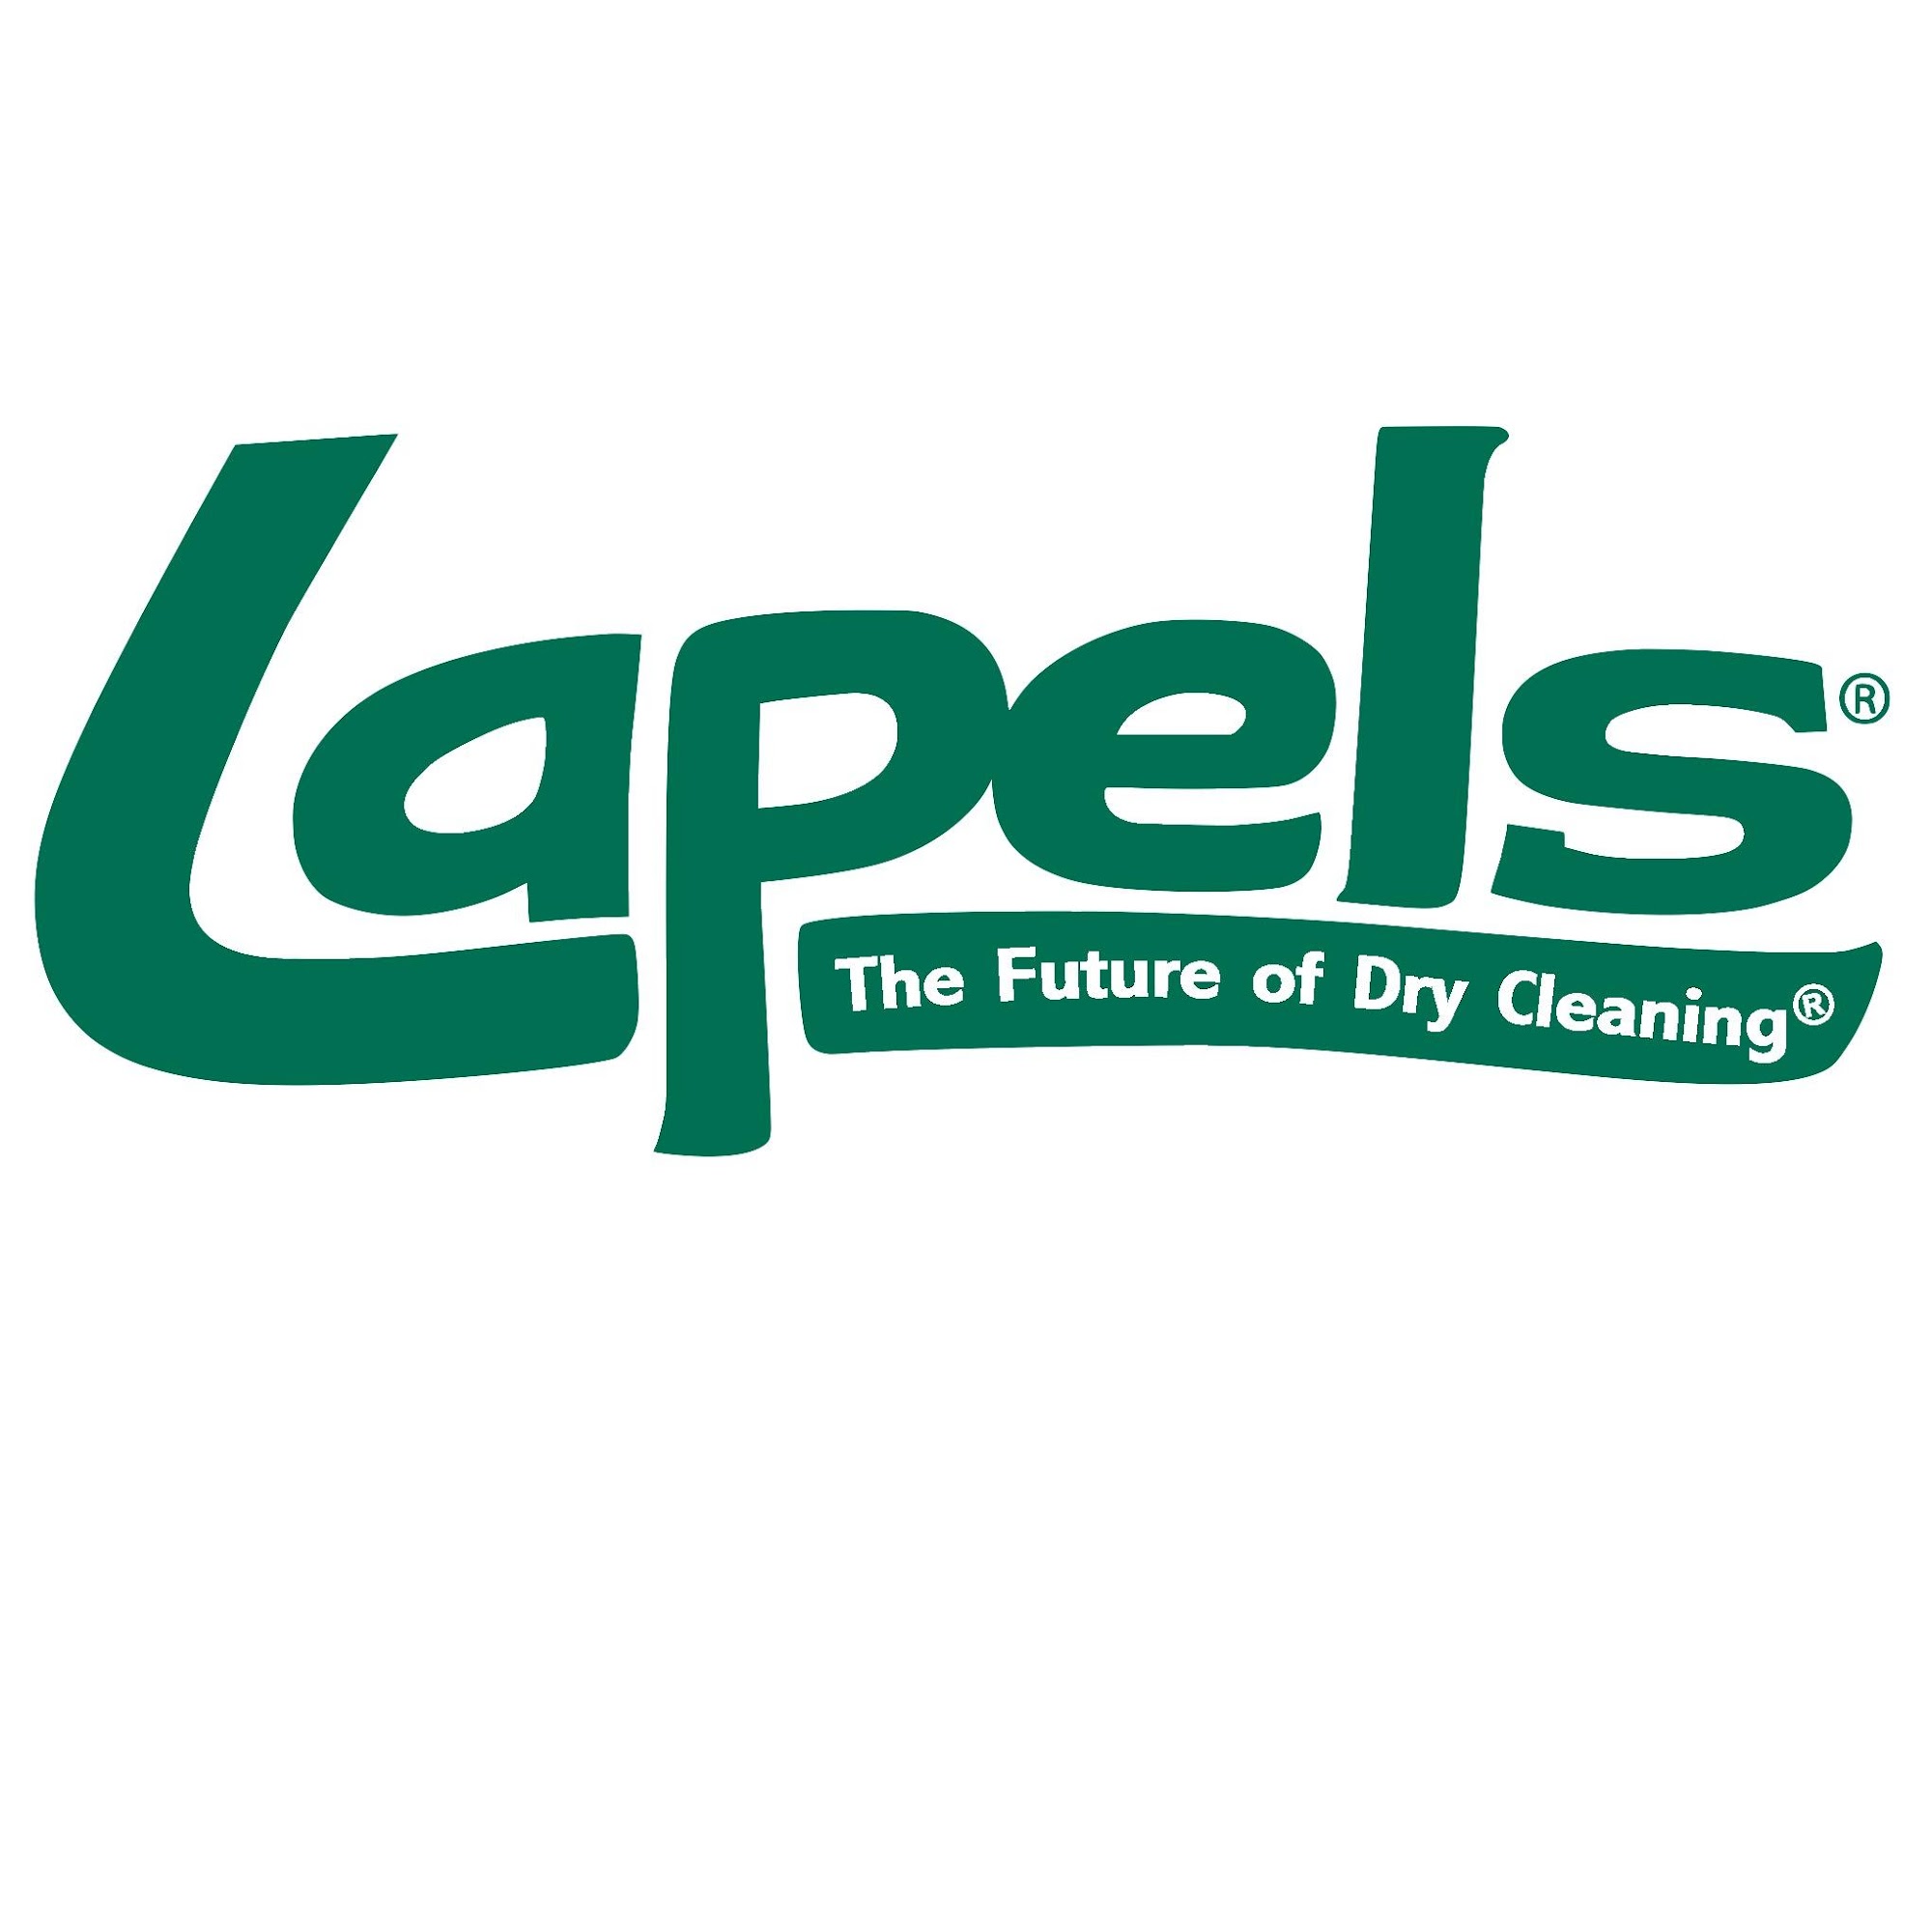 Lapels Cleaners 827 Chief Justice Cushing Hwy, Cohasset Massachusetts 02025